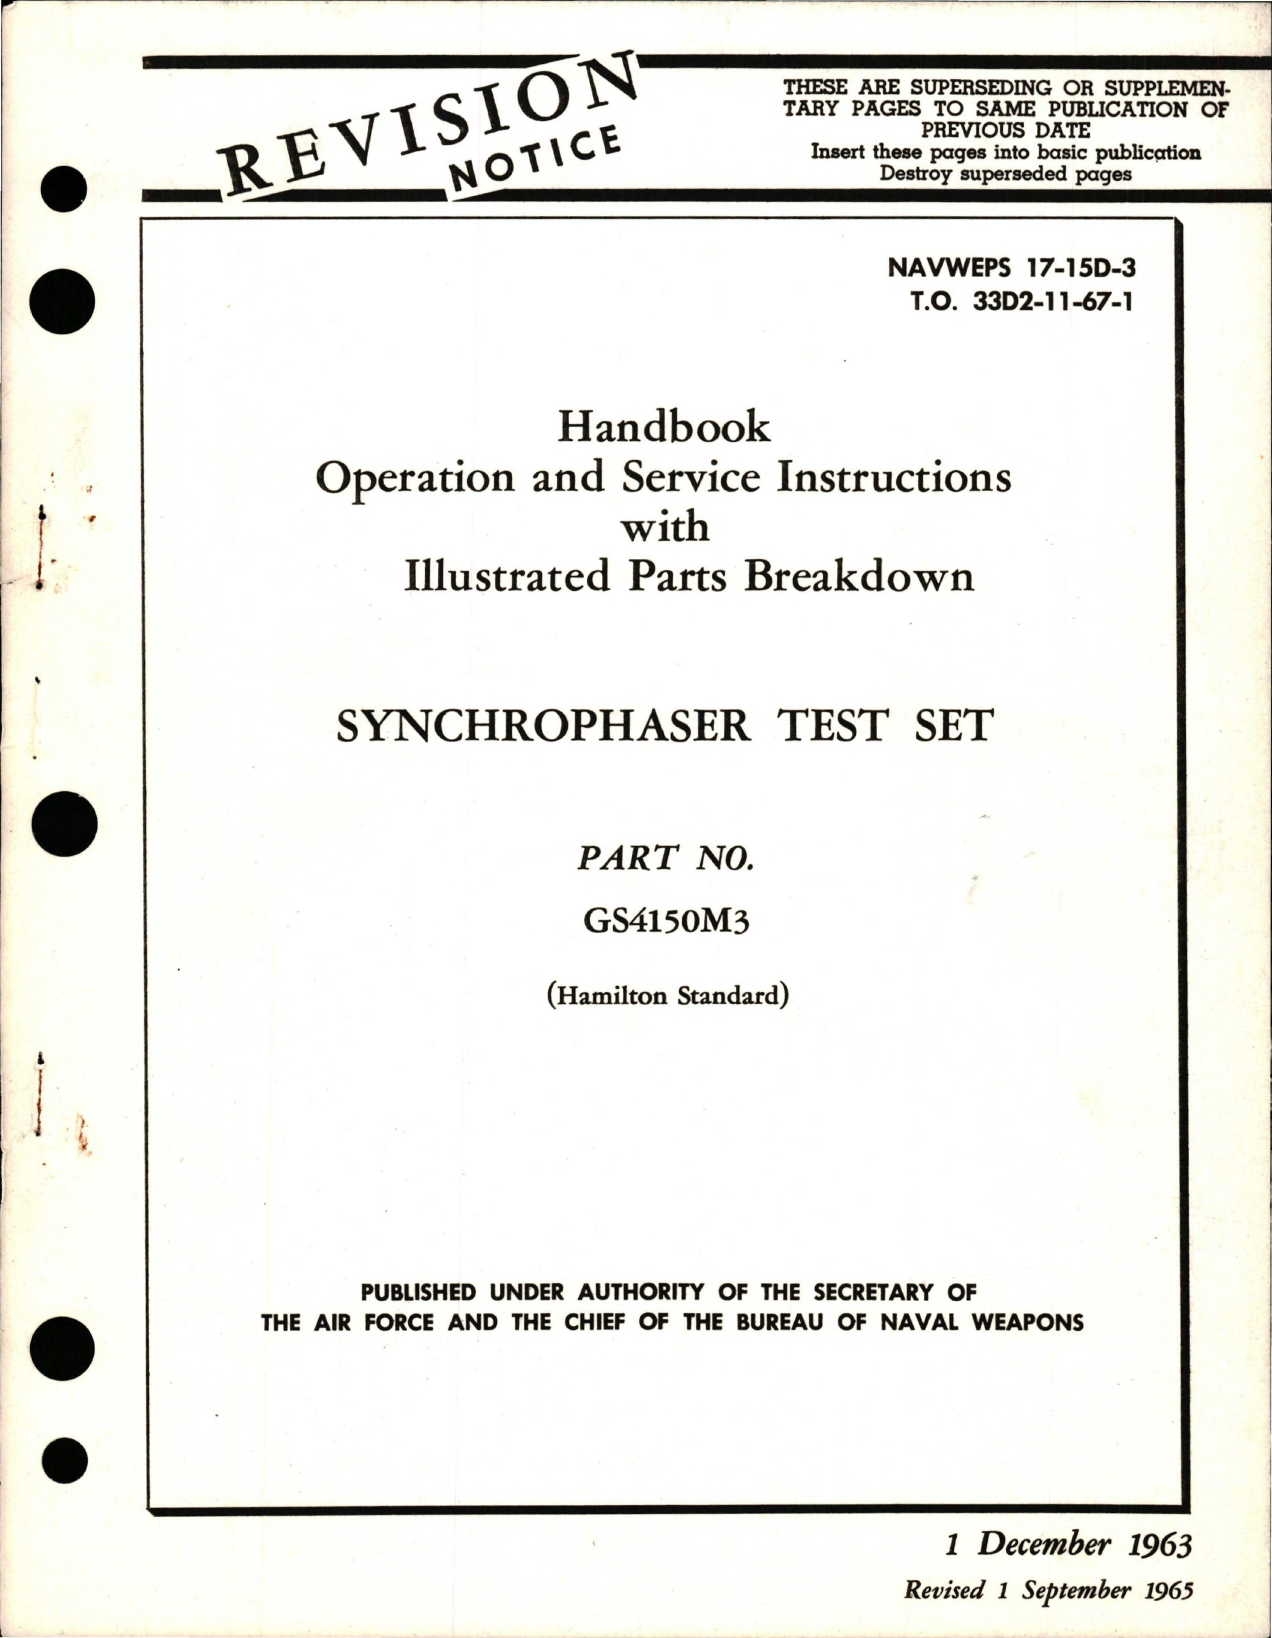 Sample page 1 from AirCorps Library document: Operation, Service Instructions with Illustrated Parts for Synchrophaser Test Set - Part GS4150M3